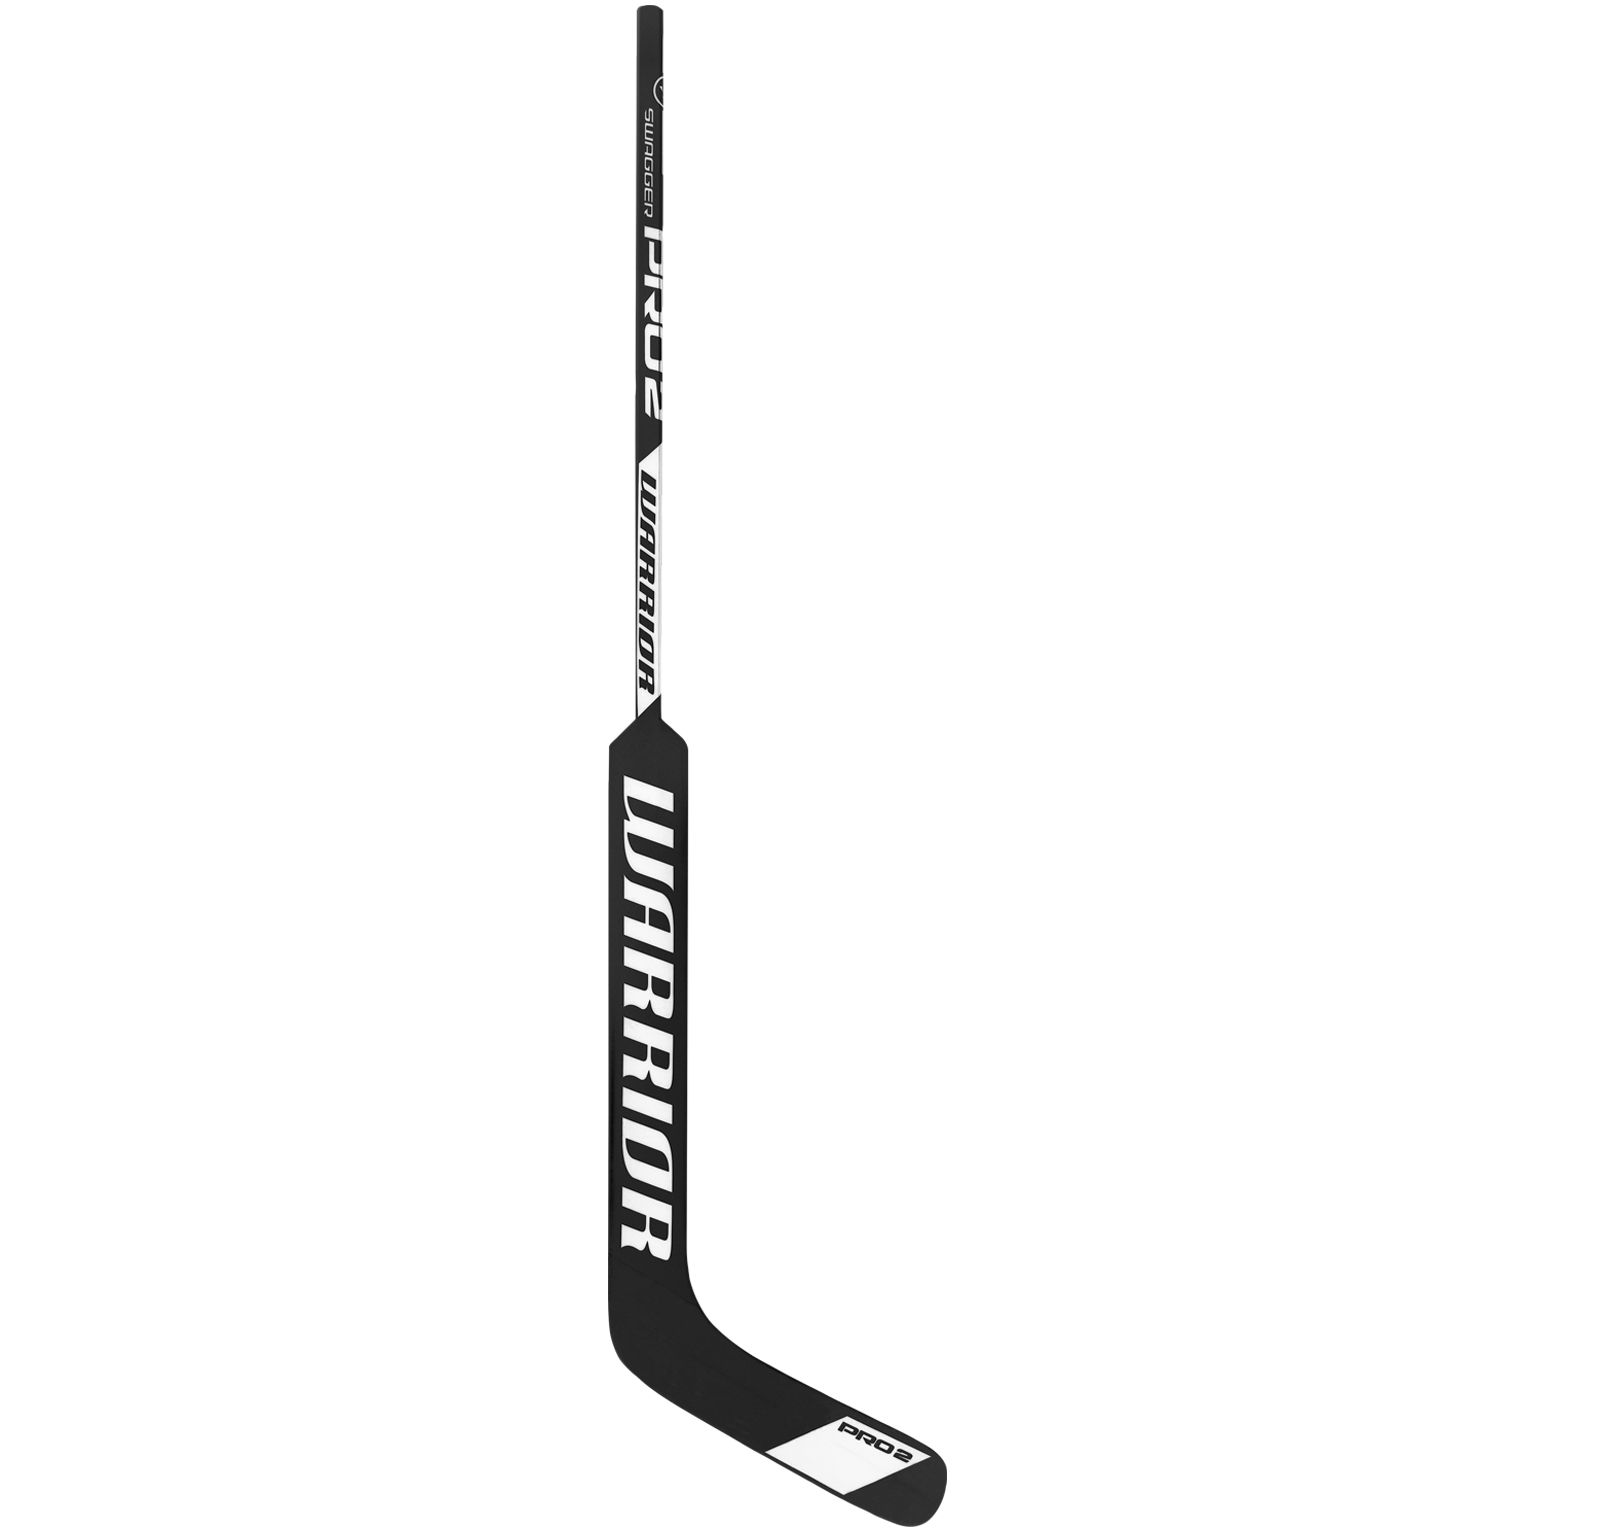 Swagger Pro 2 - INT Left, Black with White image number 0